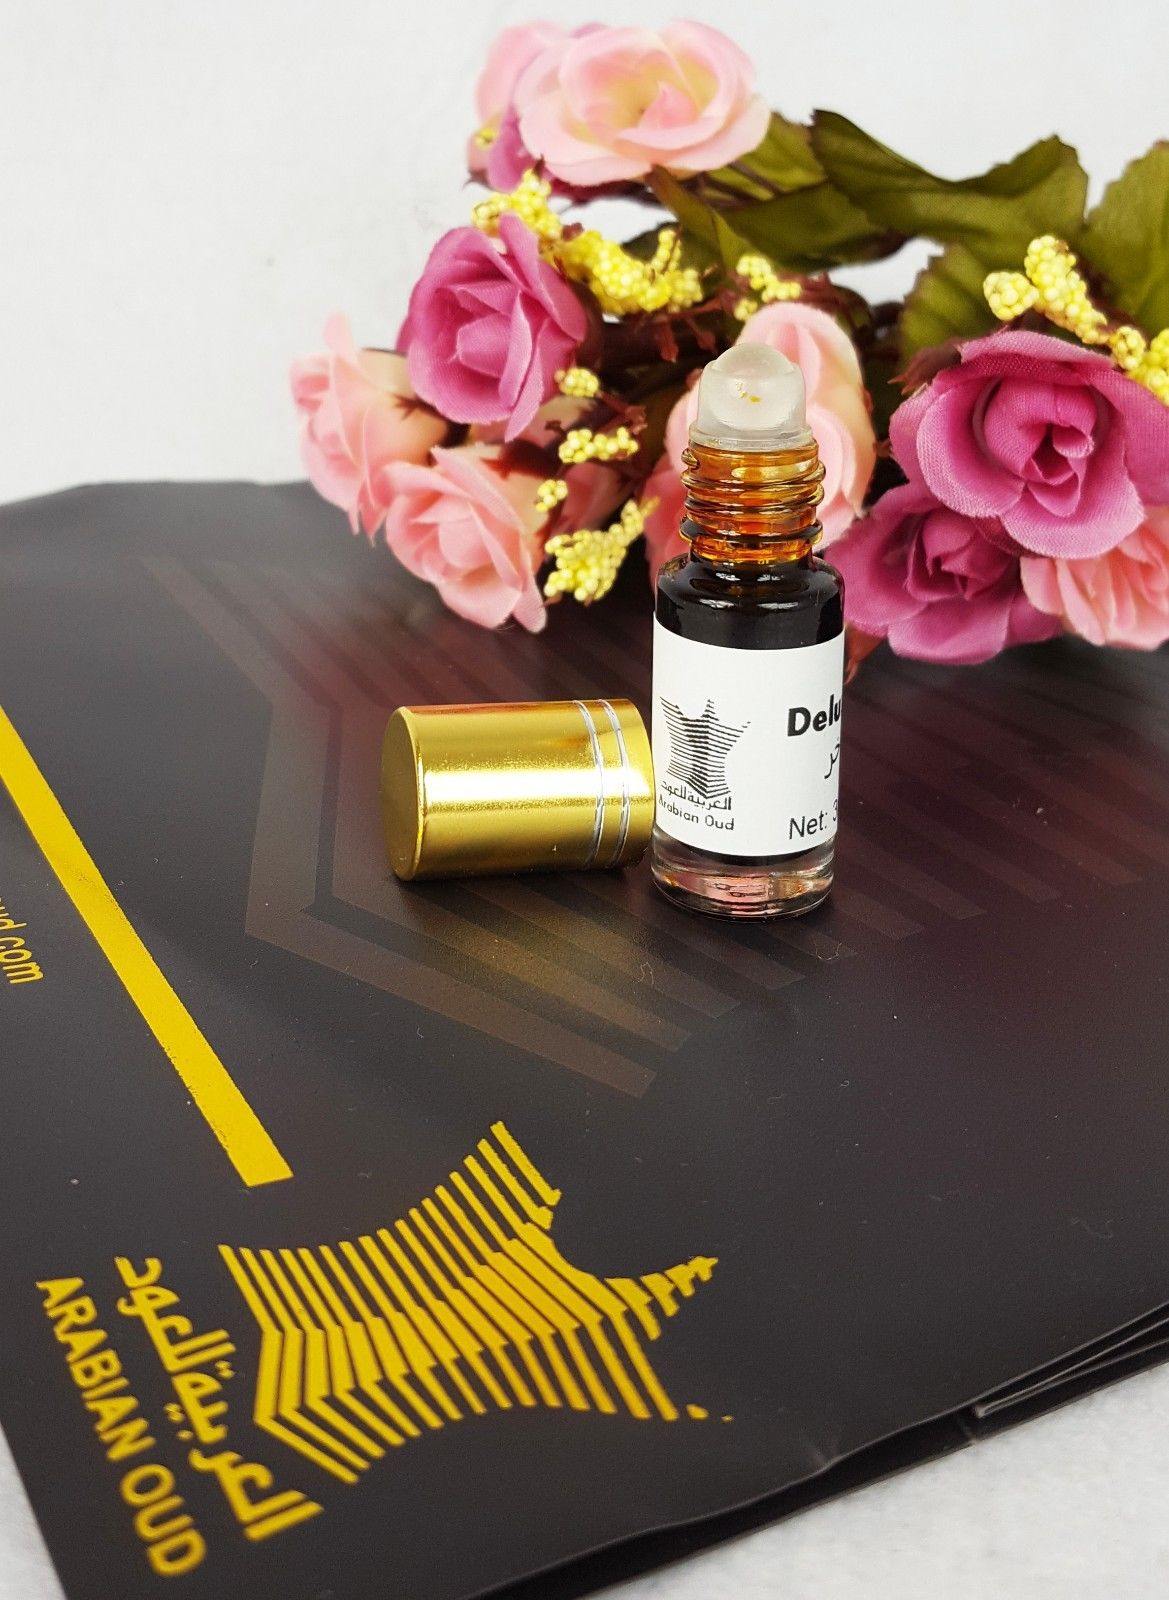 Fakhir Musk (Deluxe Black Musk) 3ml Grade-A Concentrated Perfume Oil - Arabian Shopping Zone